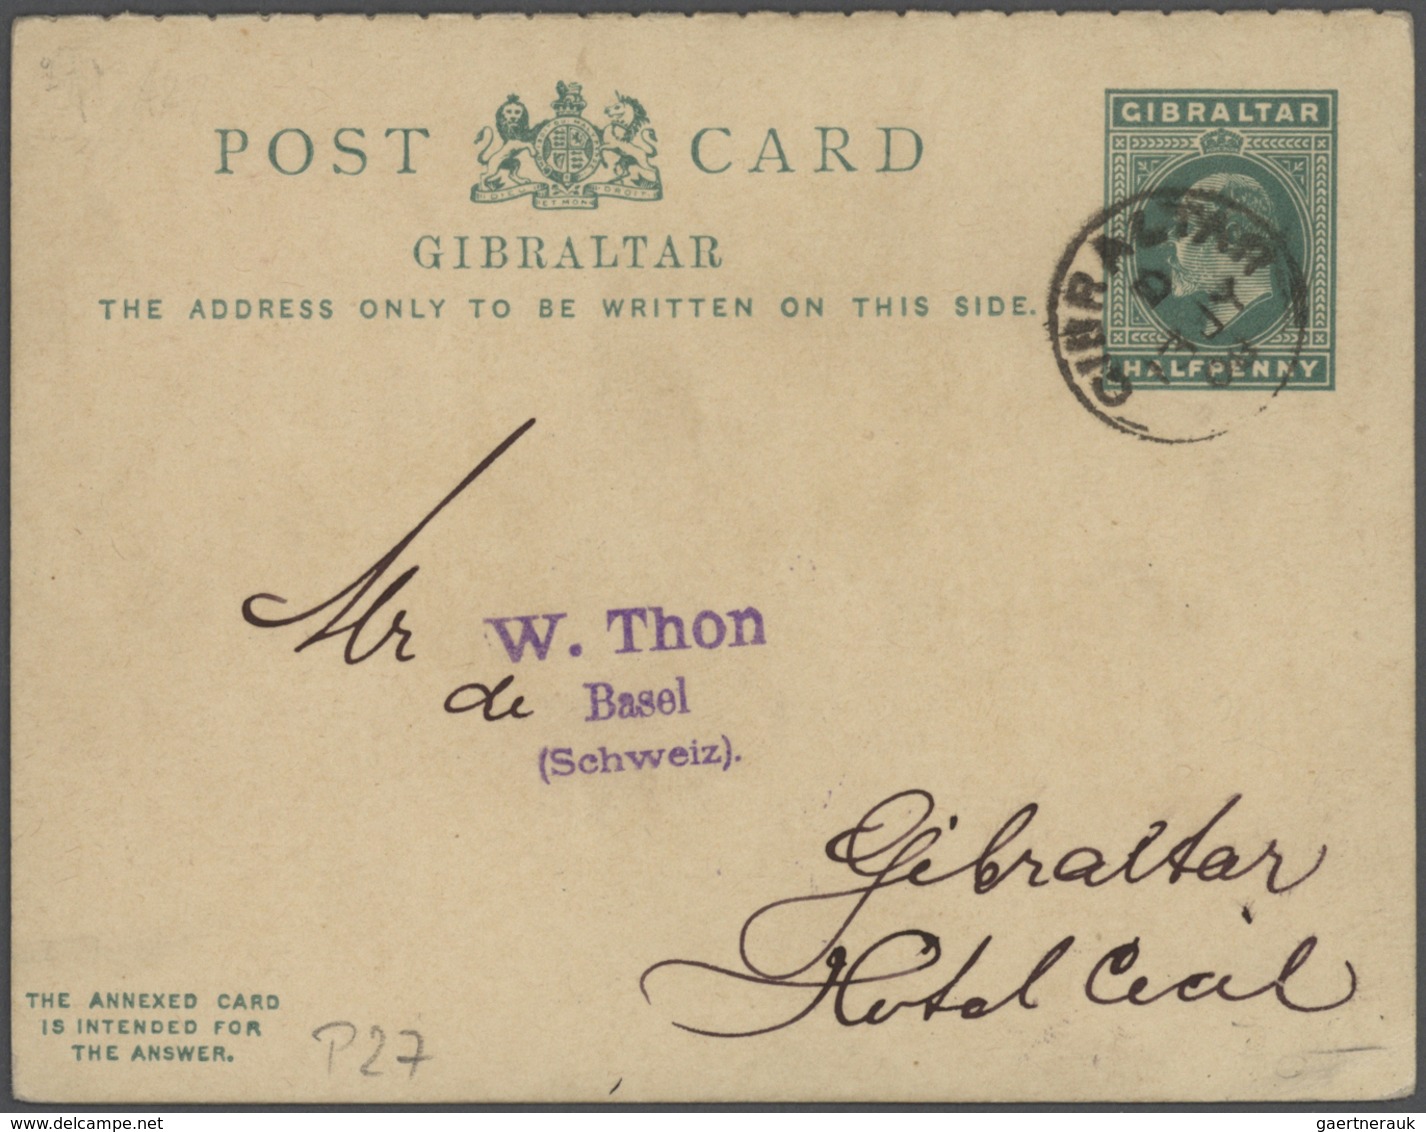 Gibraltar - Ganzsachen: 1887/1940, interesting lot of ca. 64 postal stationery cards and covers, the